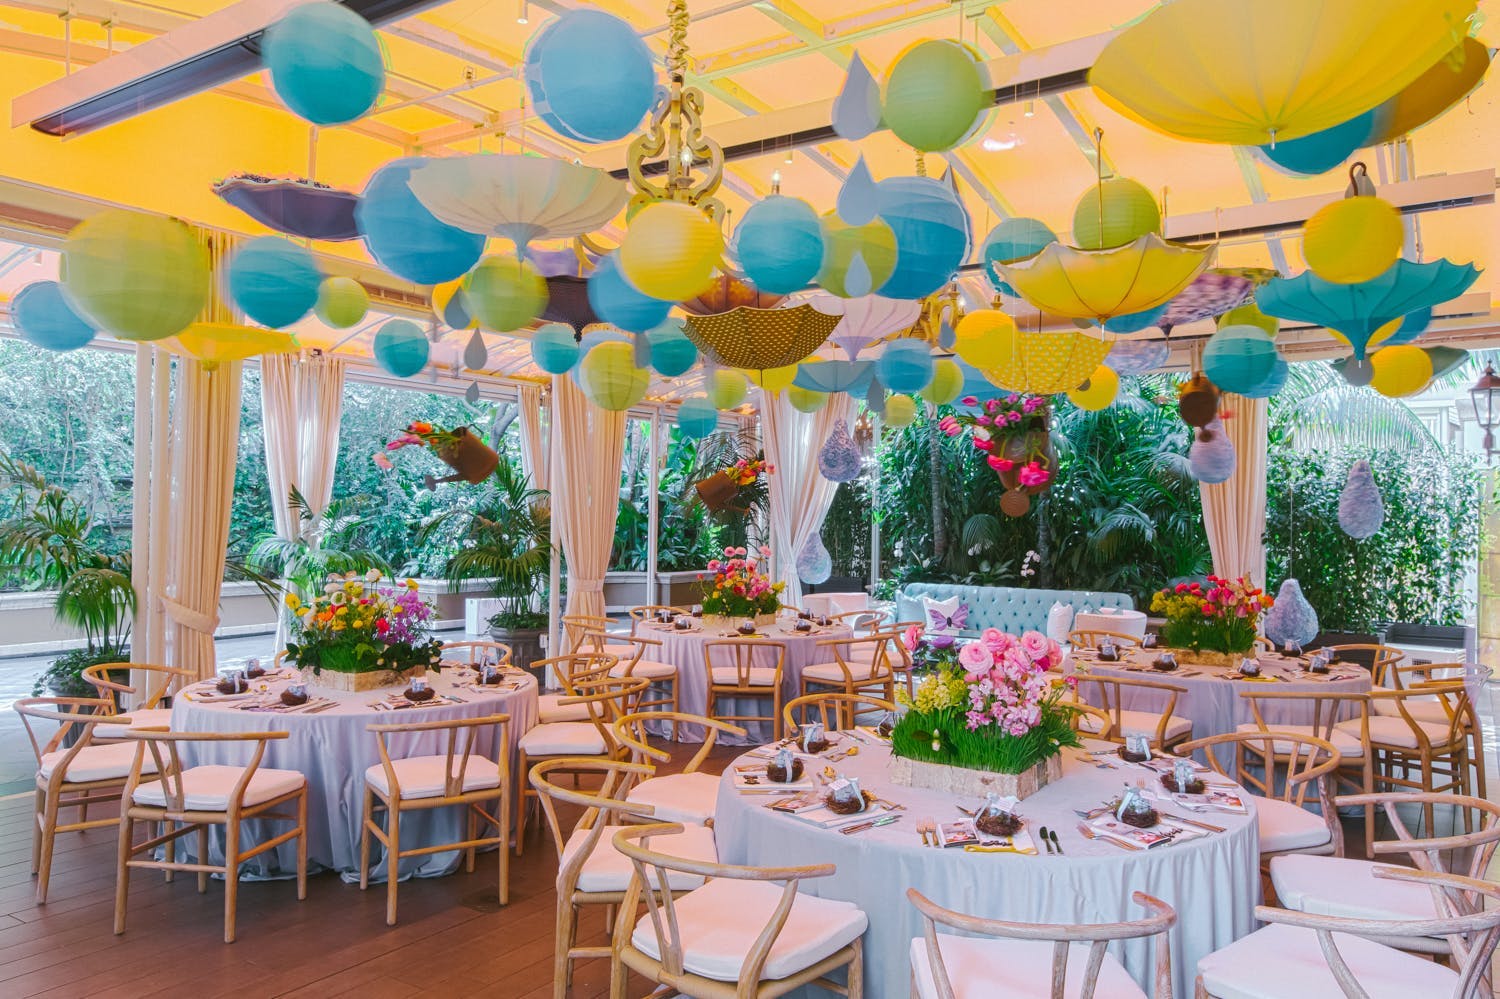 Rained-Themed Baby Shower With Umbrella Ceiling Installation | PartySlate